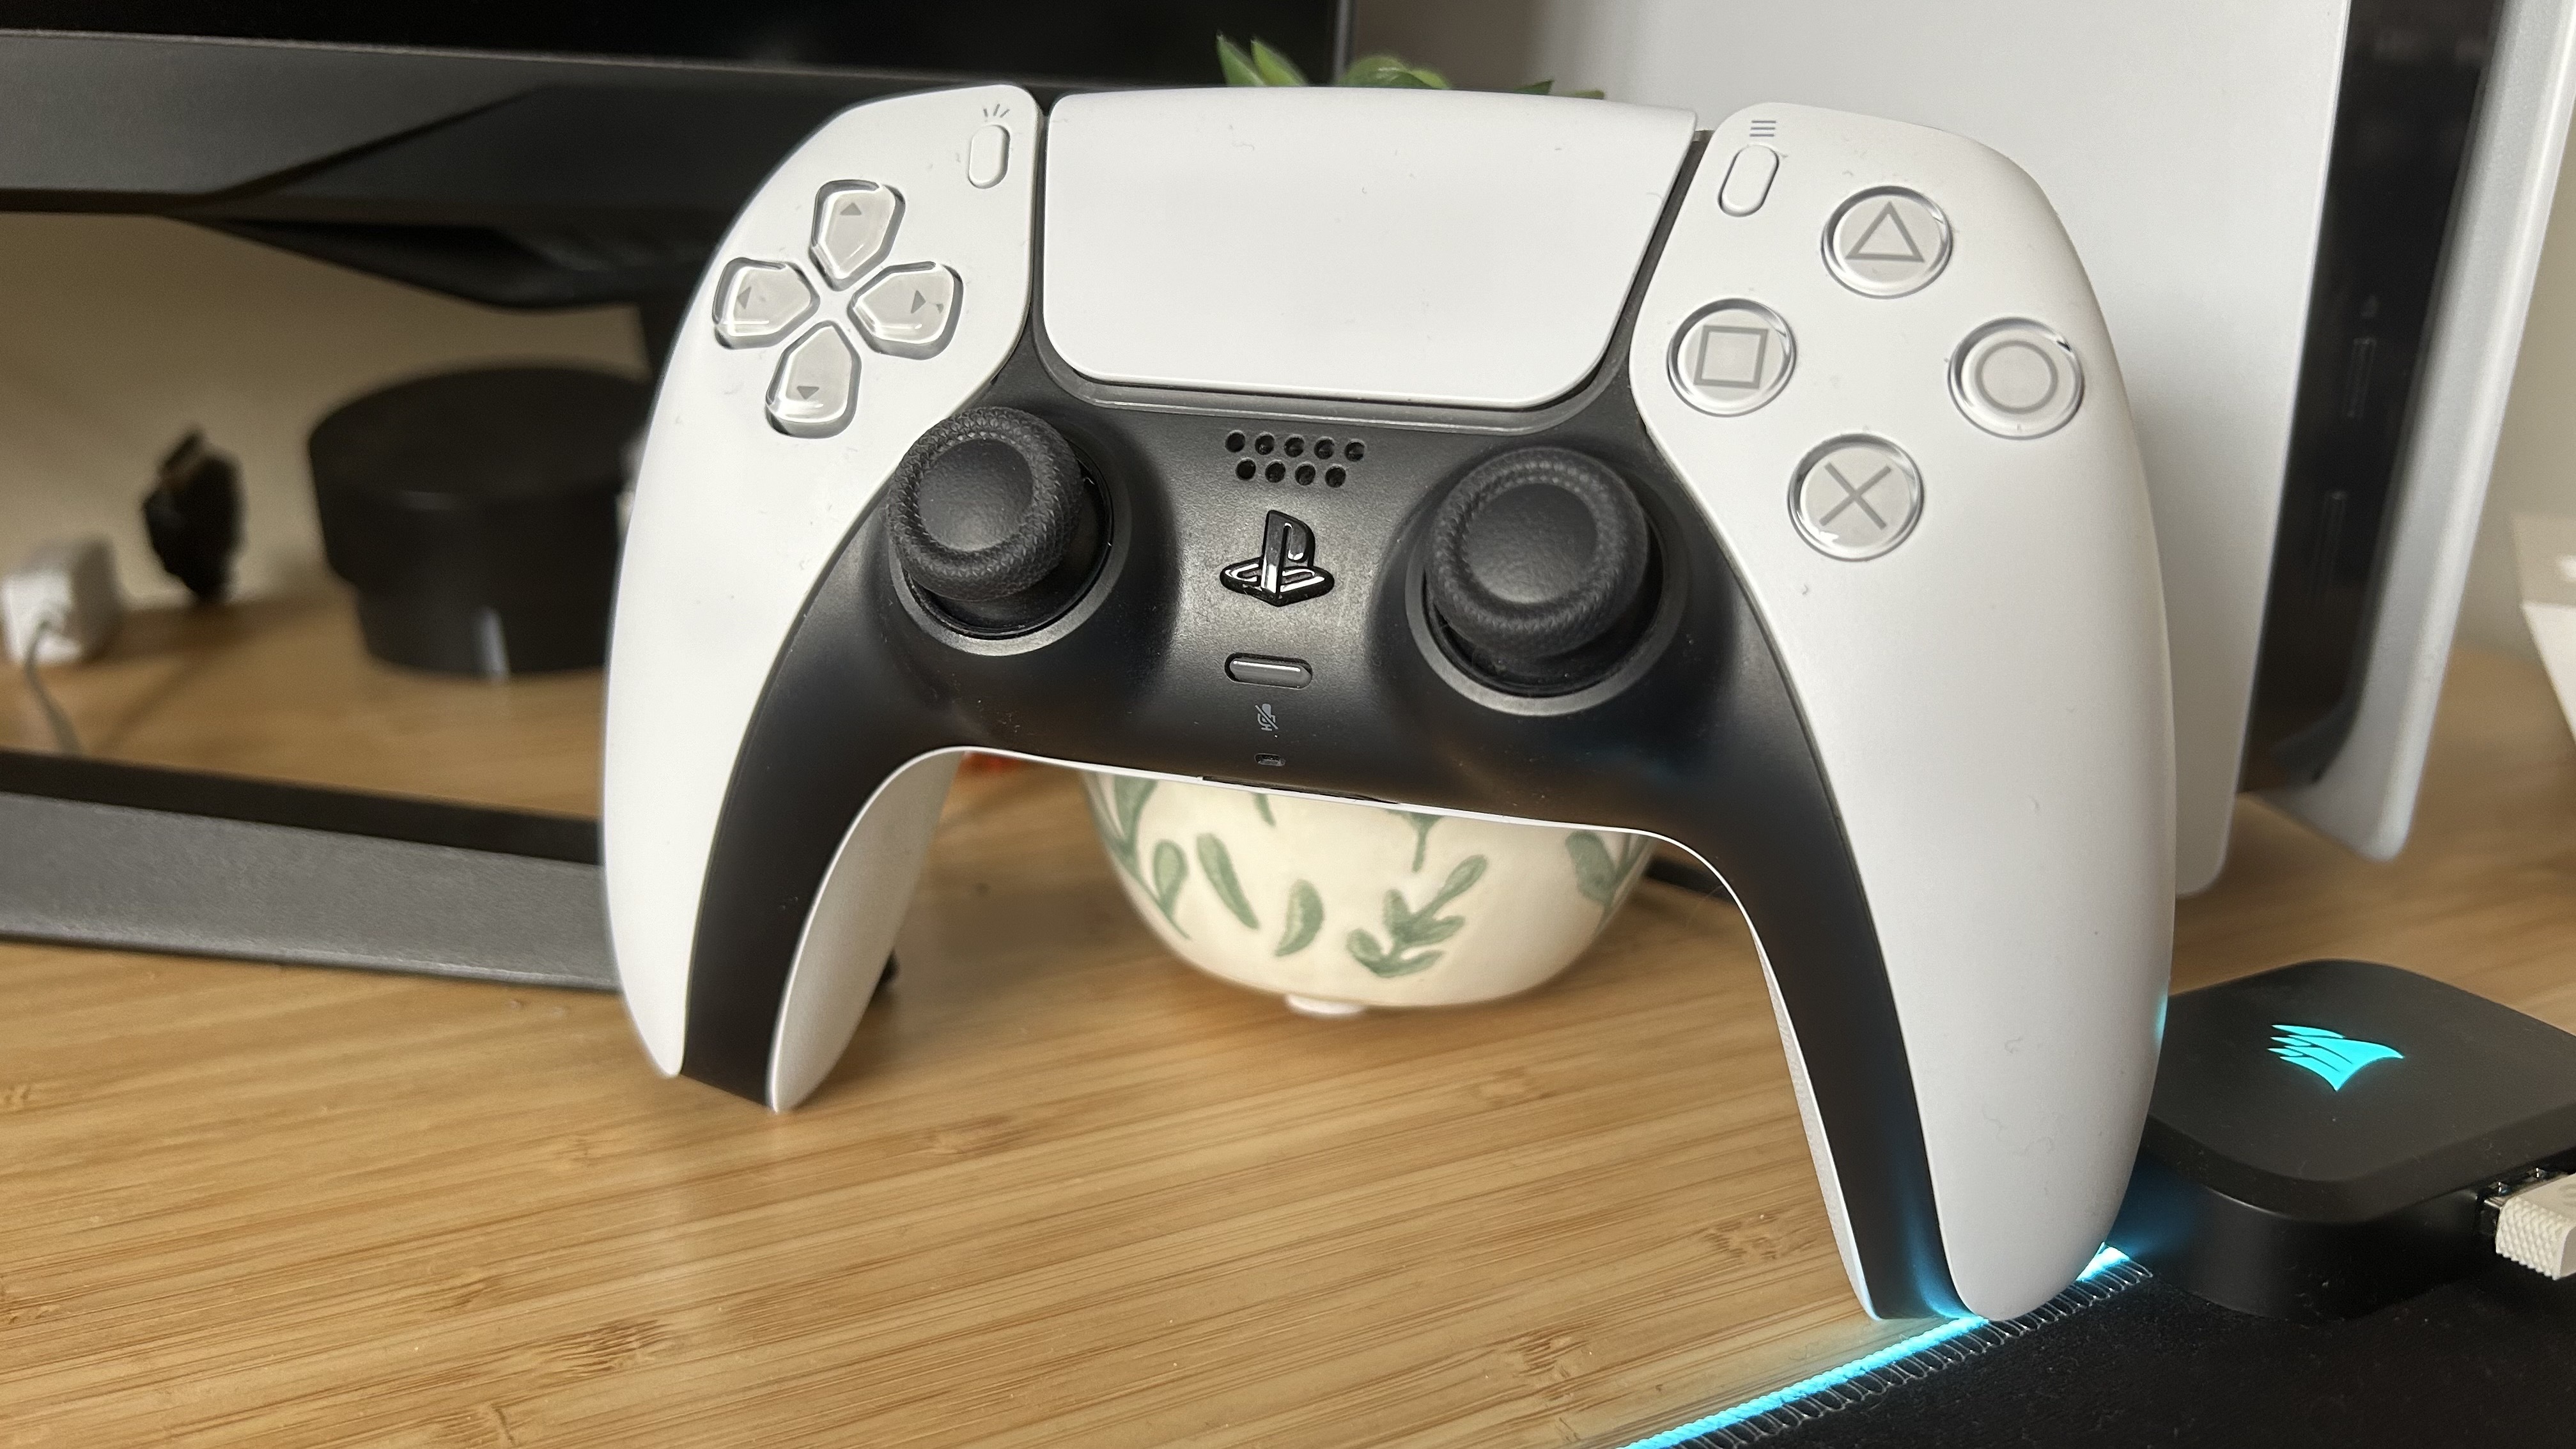 PS5 controller standing on a wooden desk